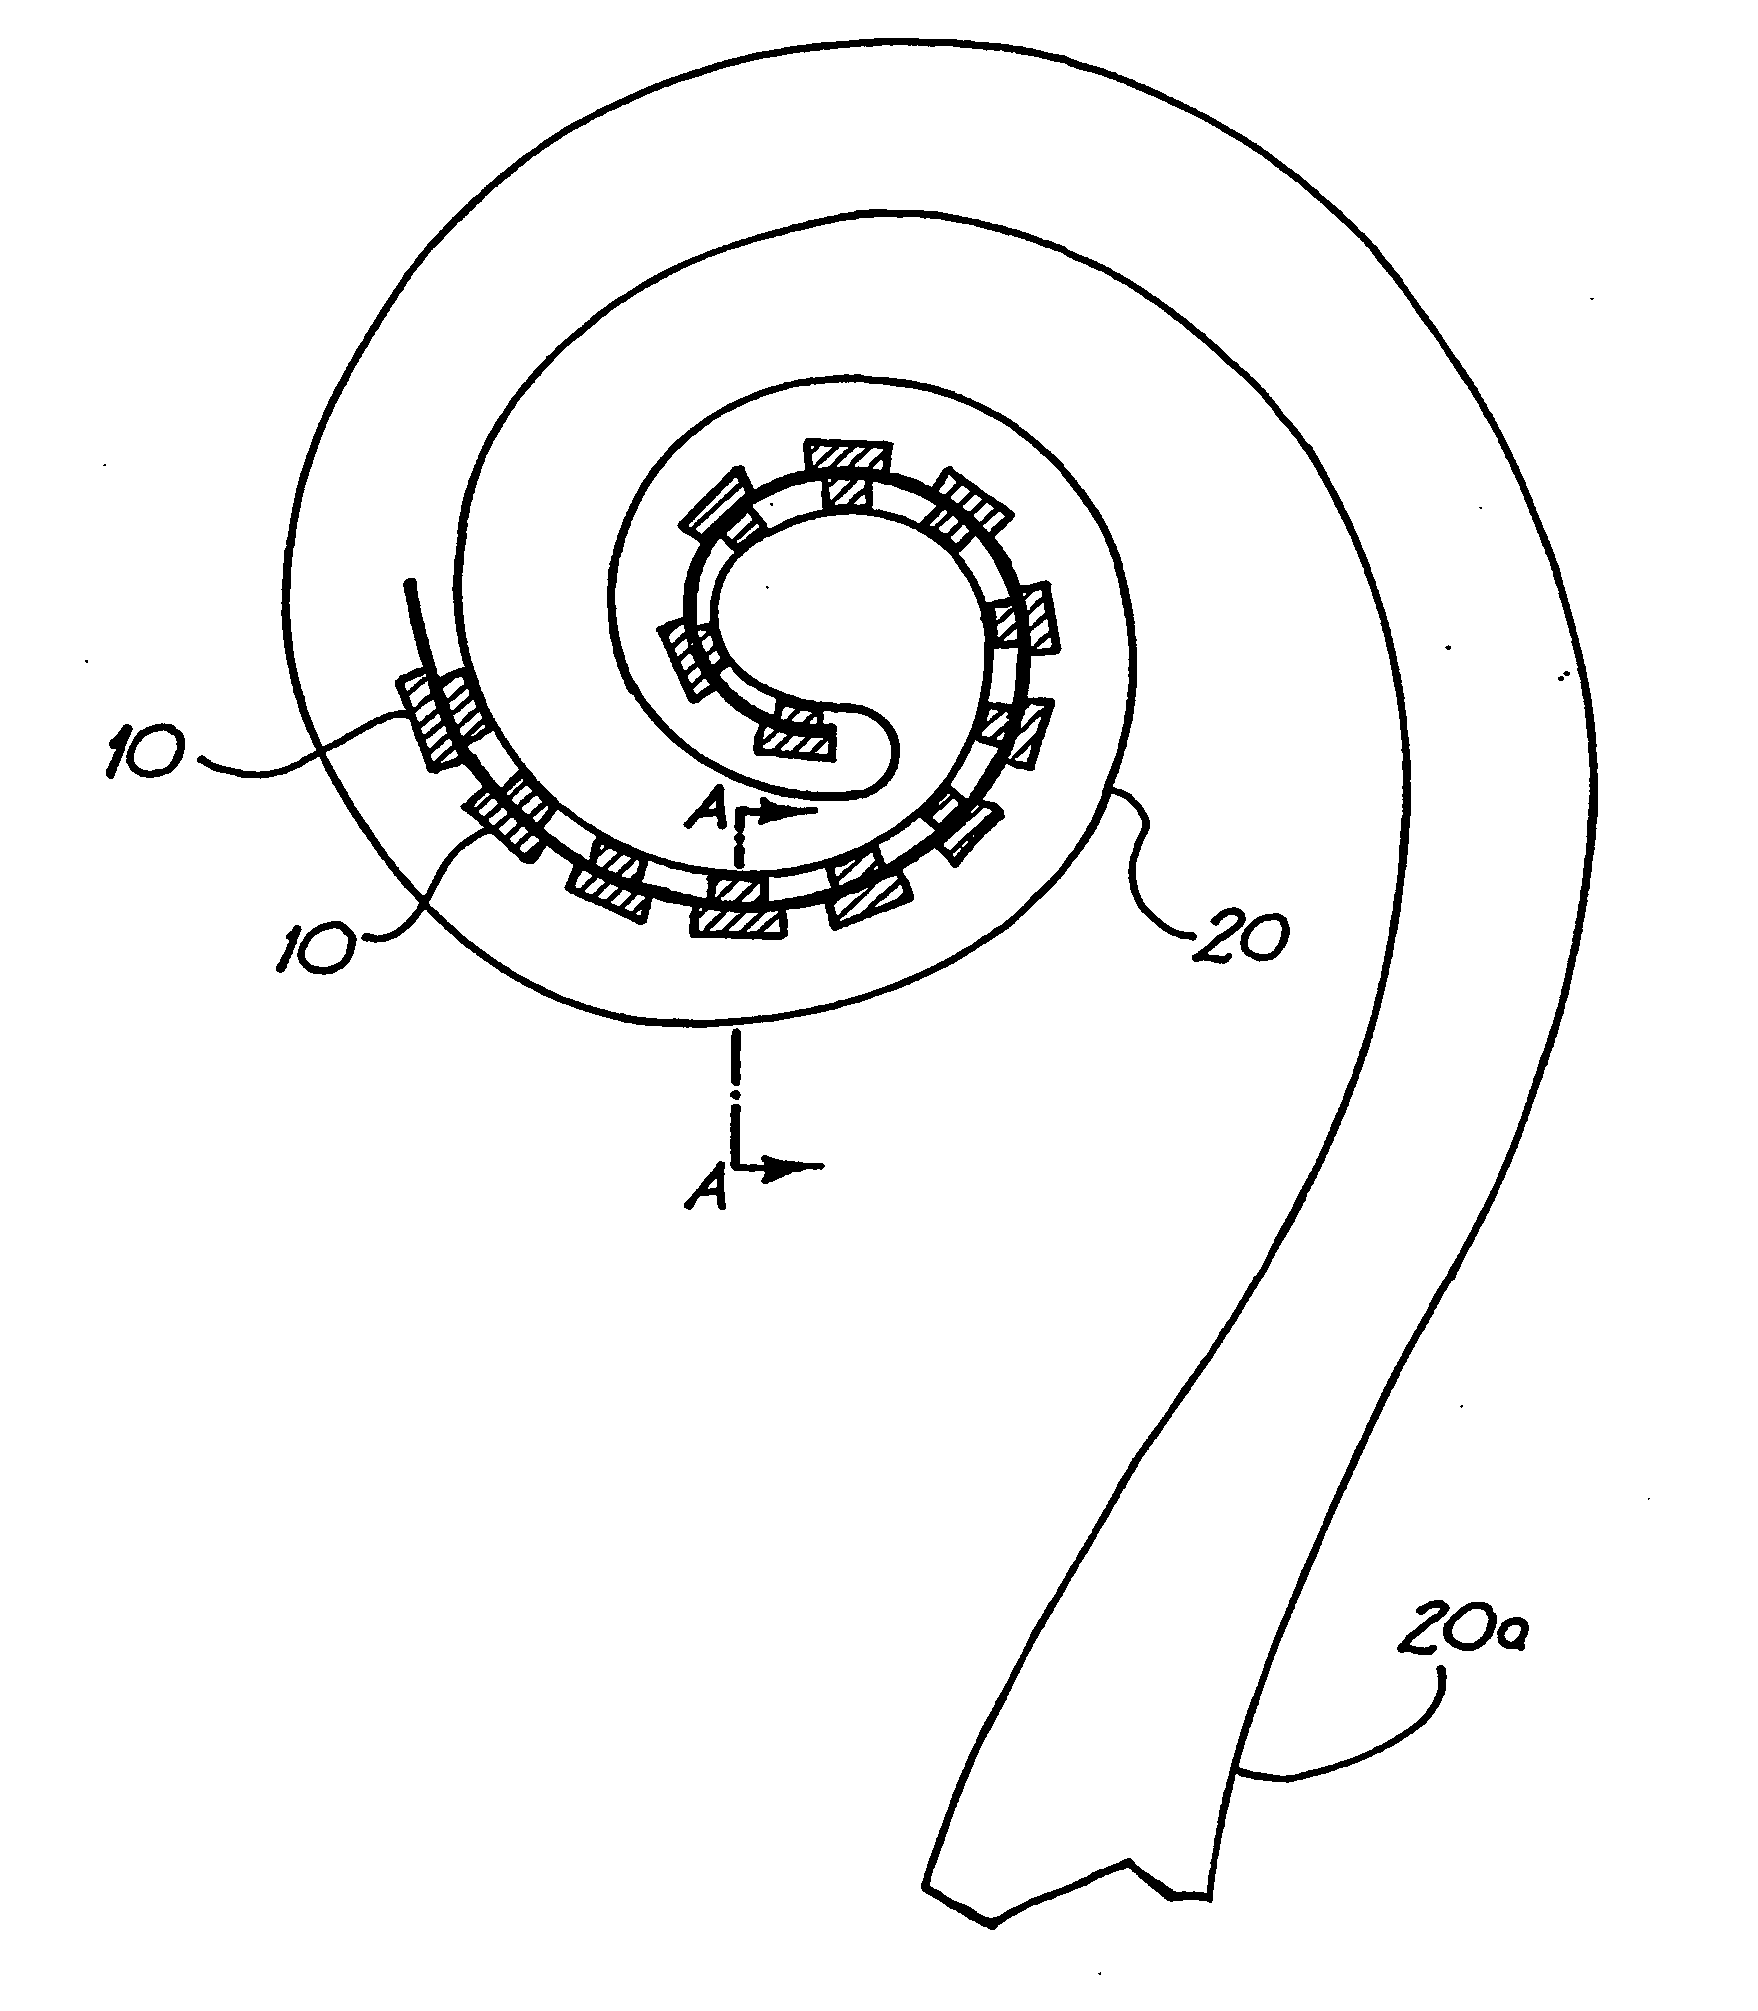 Multi-electrode cochlear implant system with distributed electronics